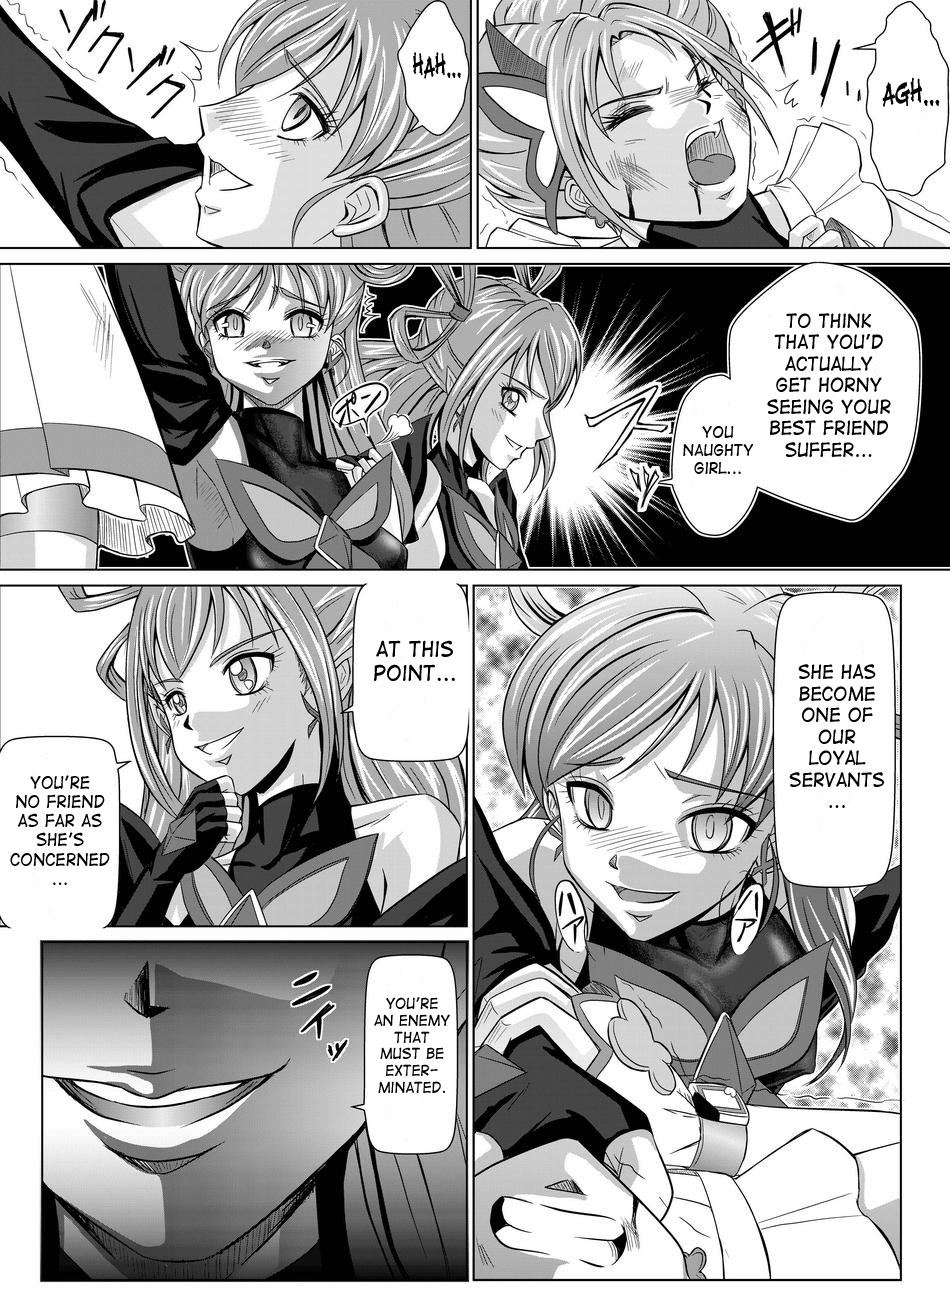 [Macxes] Another Conclusion 2 (Pretty Cure) [English][SaHa] 